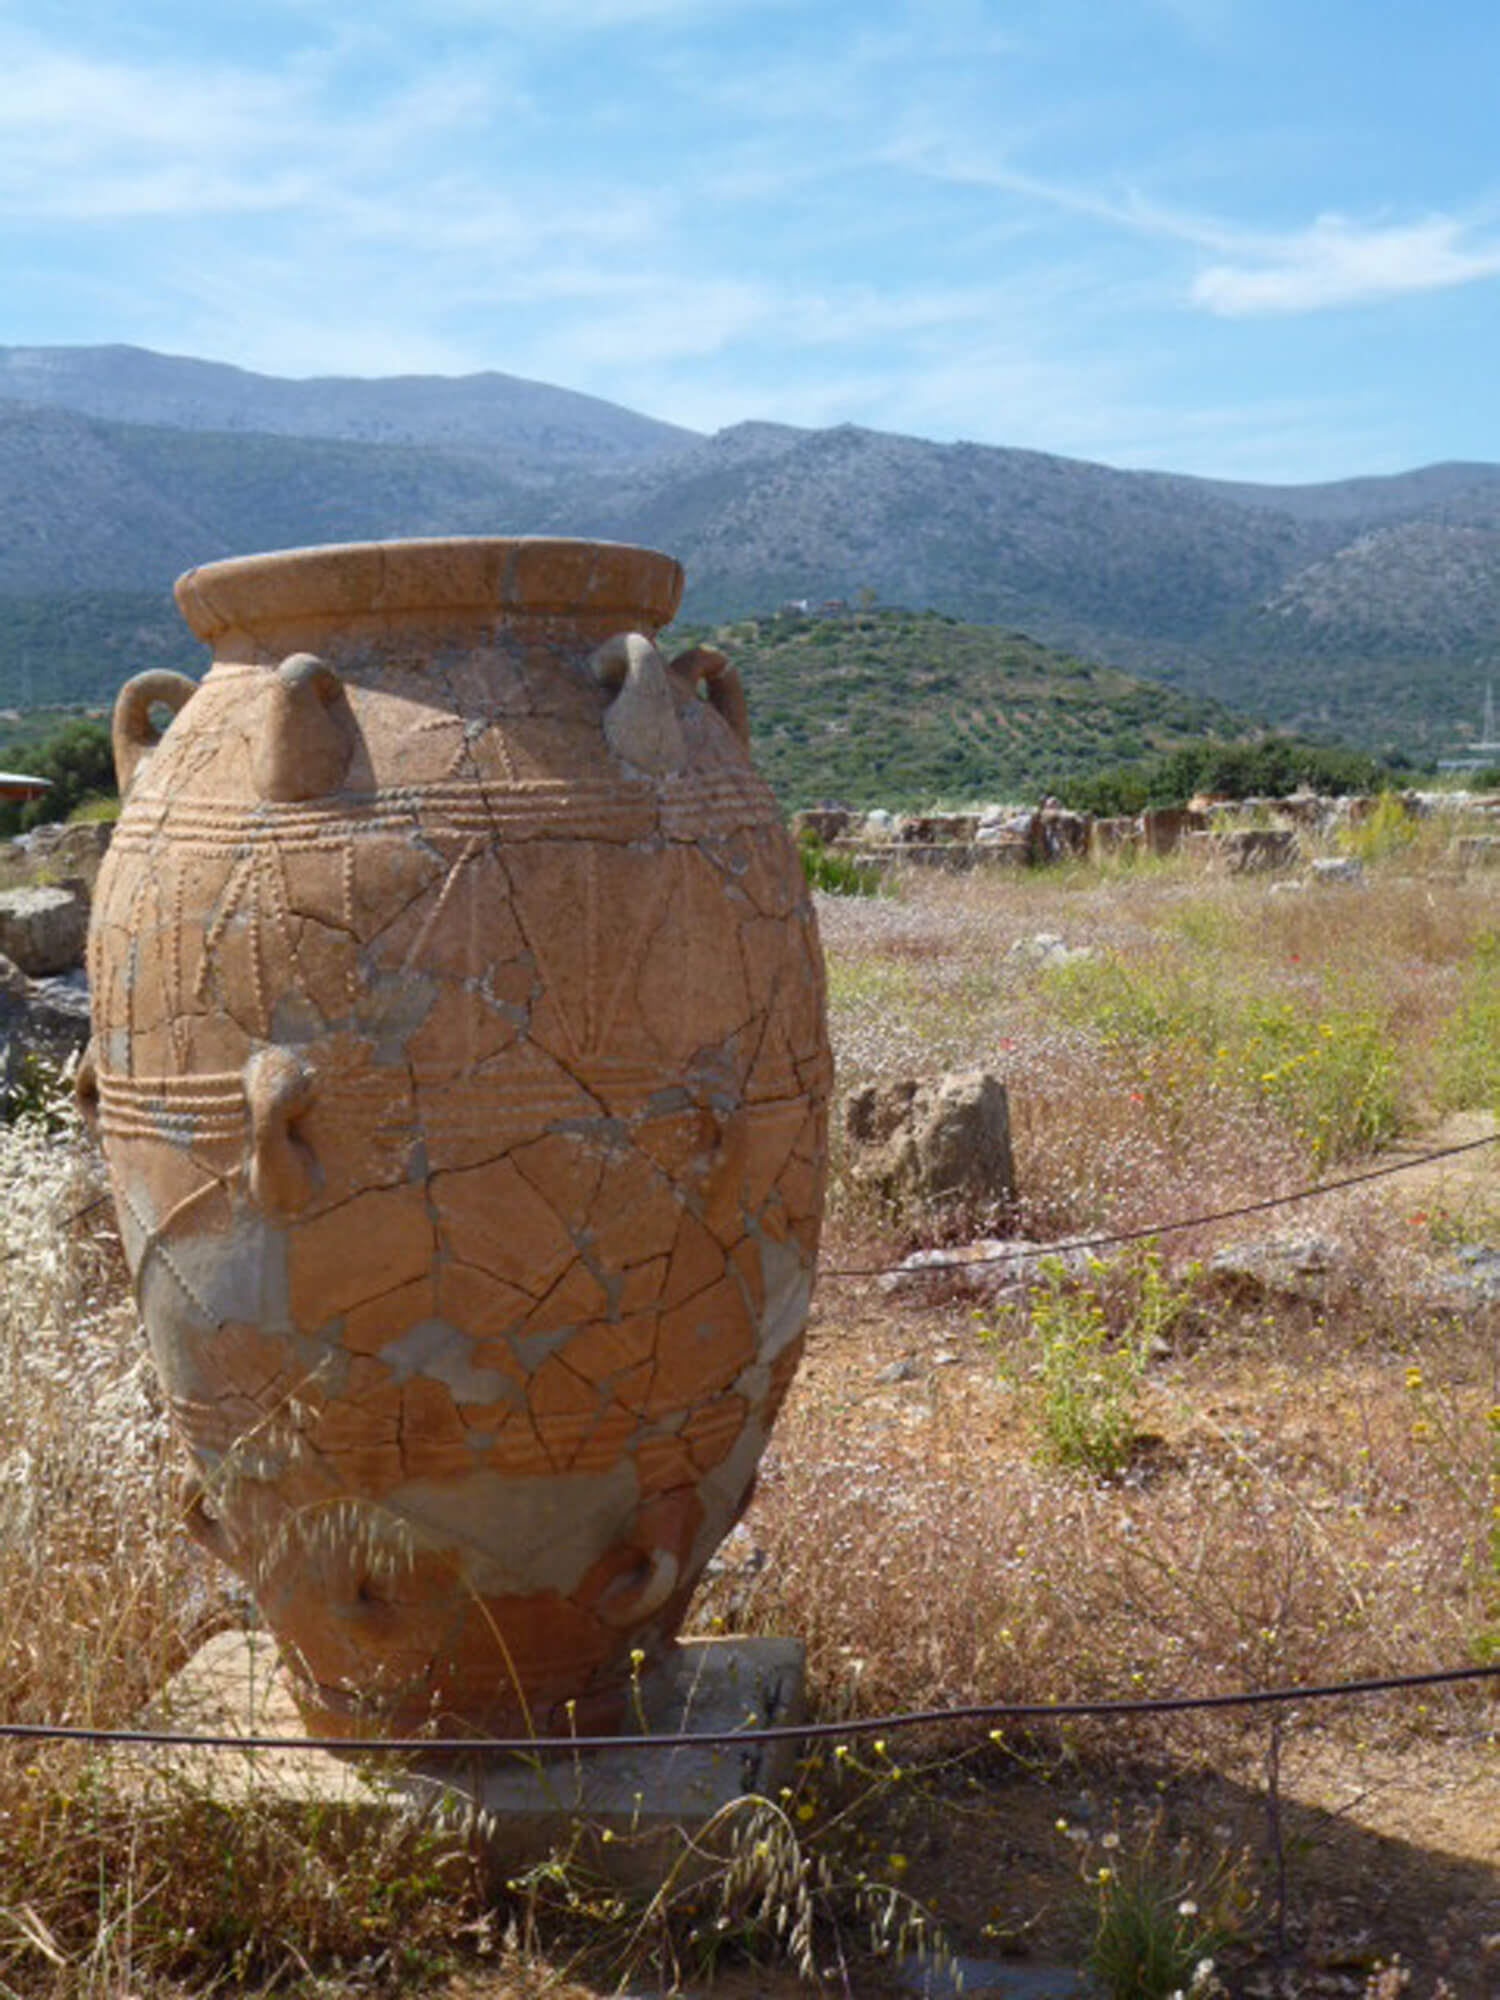 A Minoan storage pot (pithoi) can contain grain, pulses or olives. Credit: Copyright 2016 Rosemary Barron